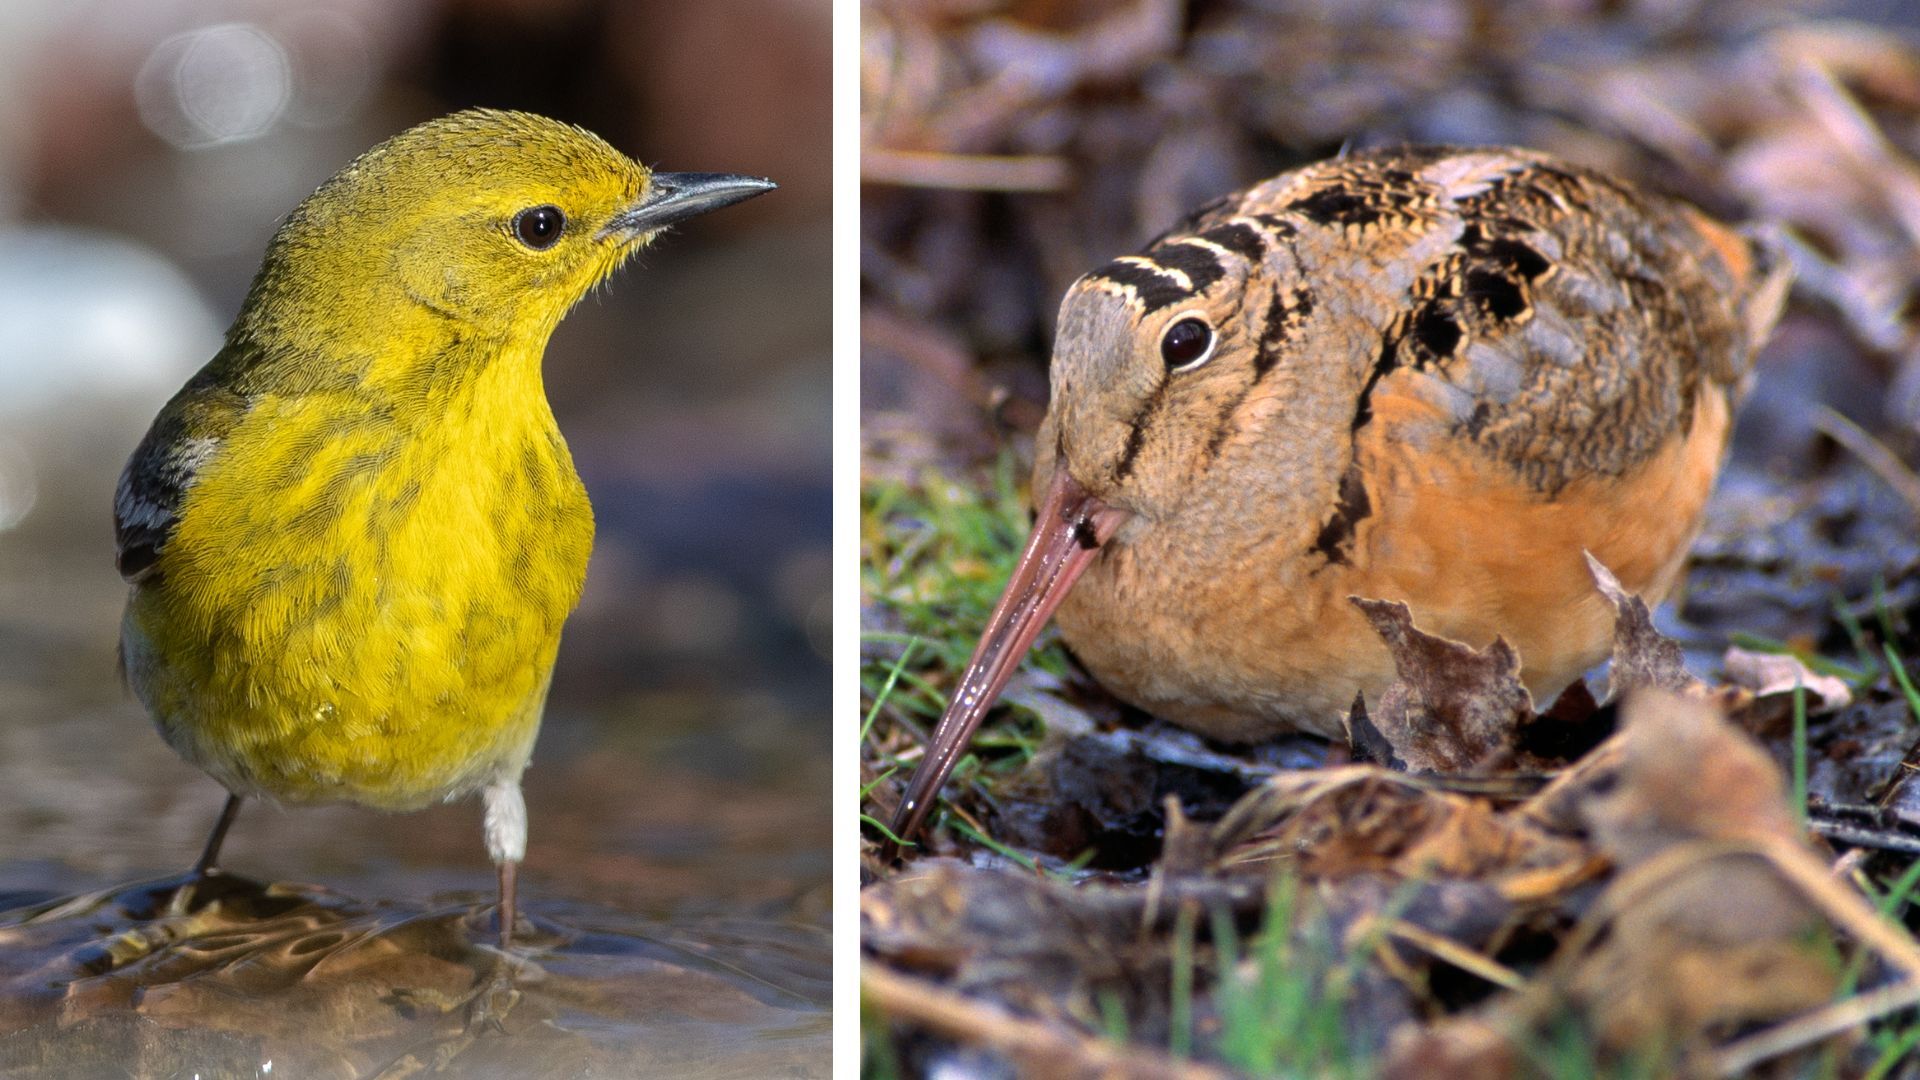 Left: Pine Warbler photo by Linda Krueger. Right: American Woodcock photo by Rick734